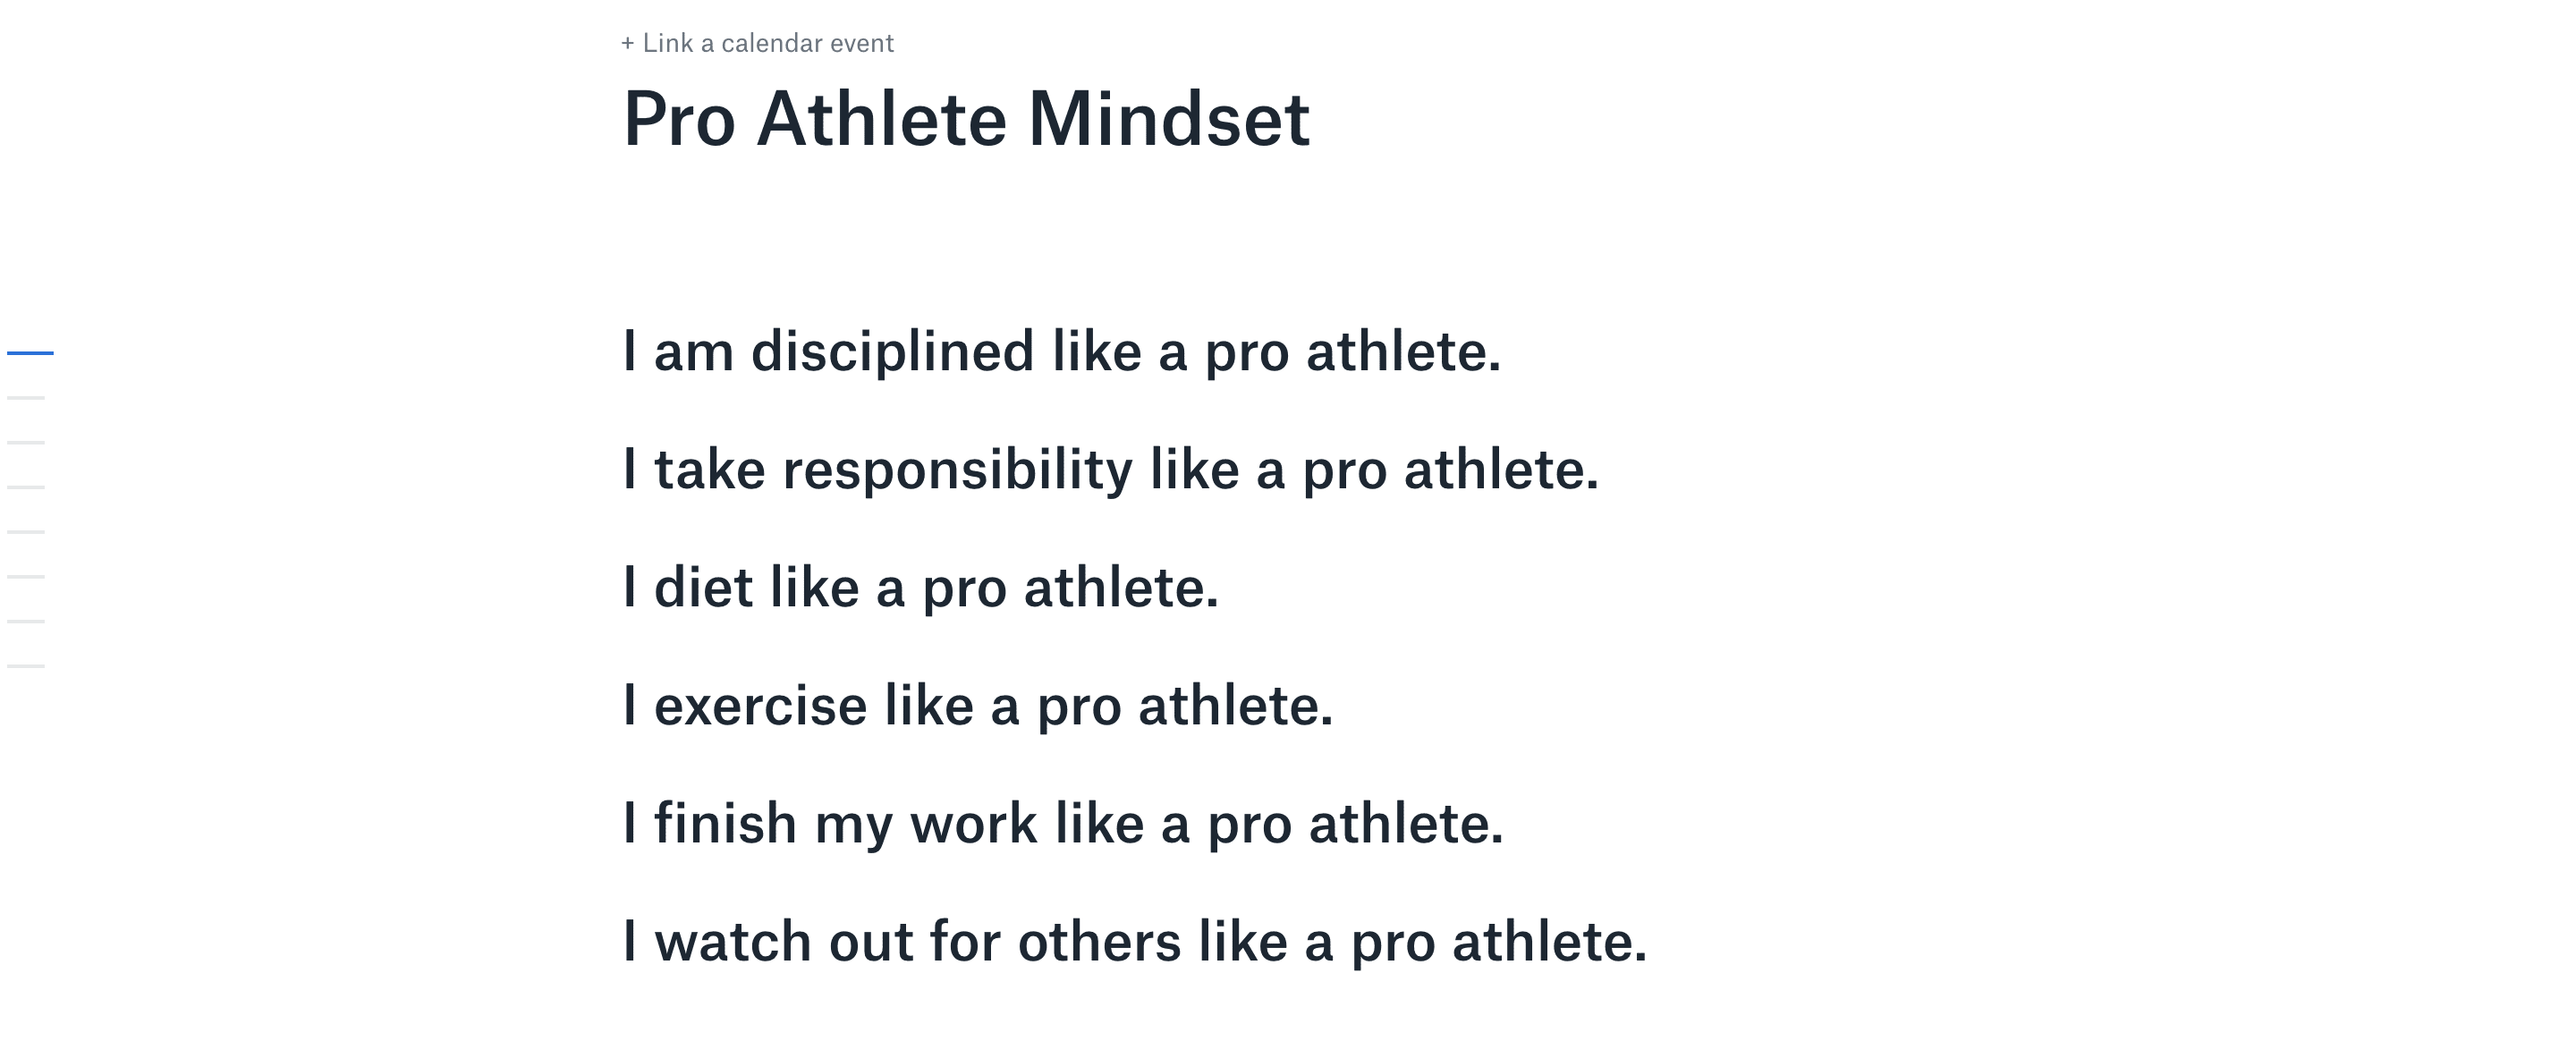 How to Get Better at Golf - Pro Athlete Mindset